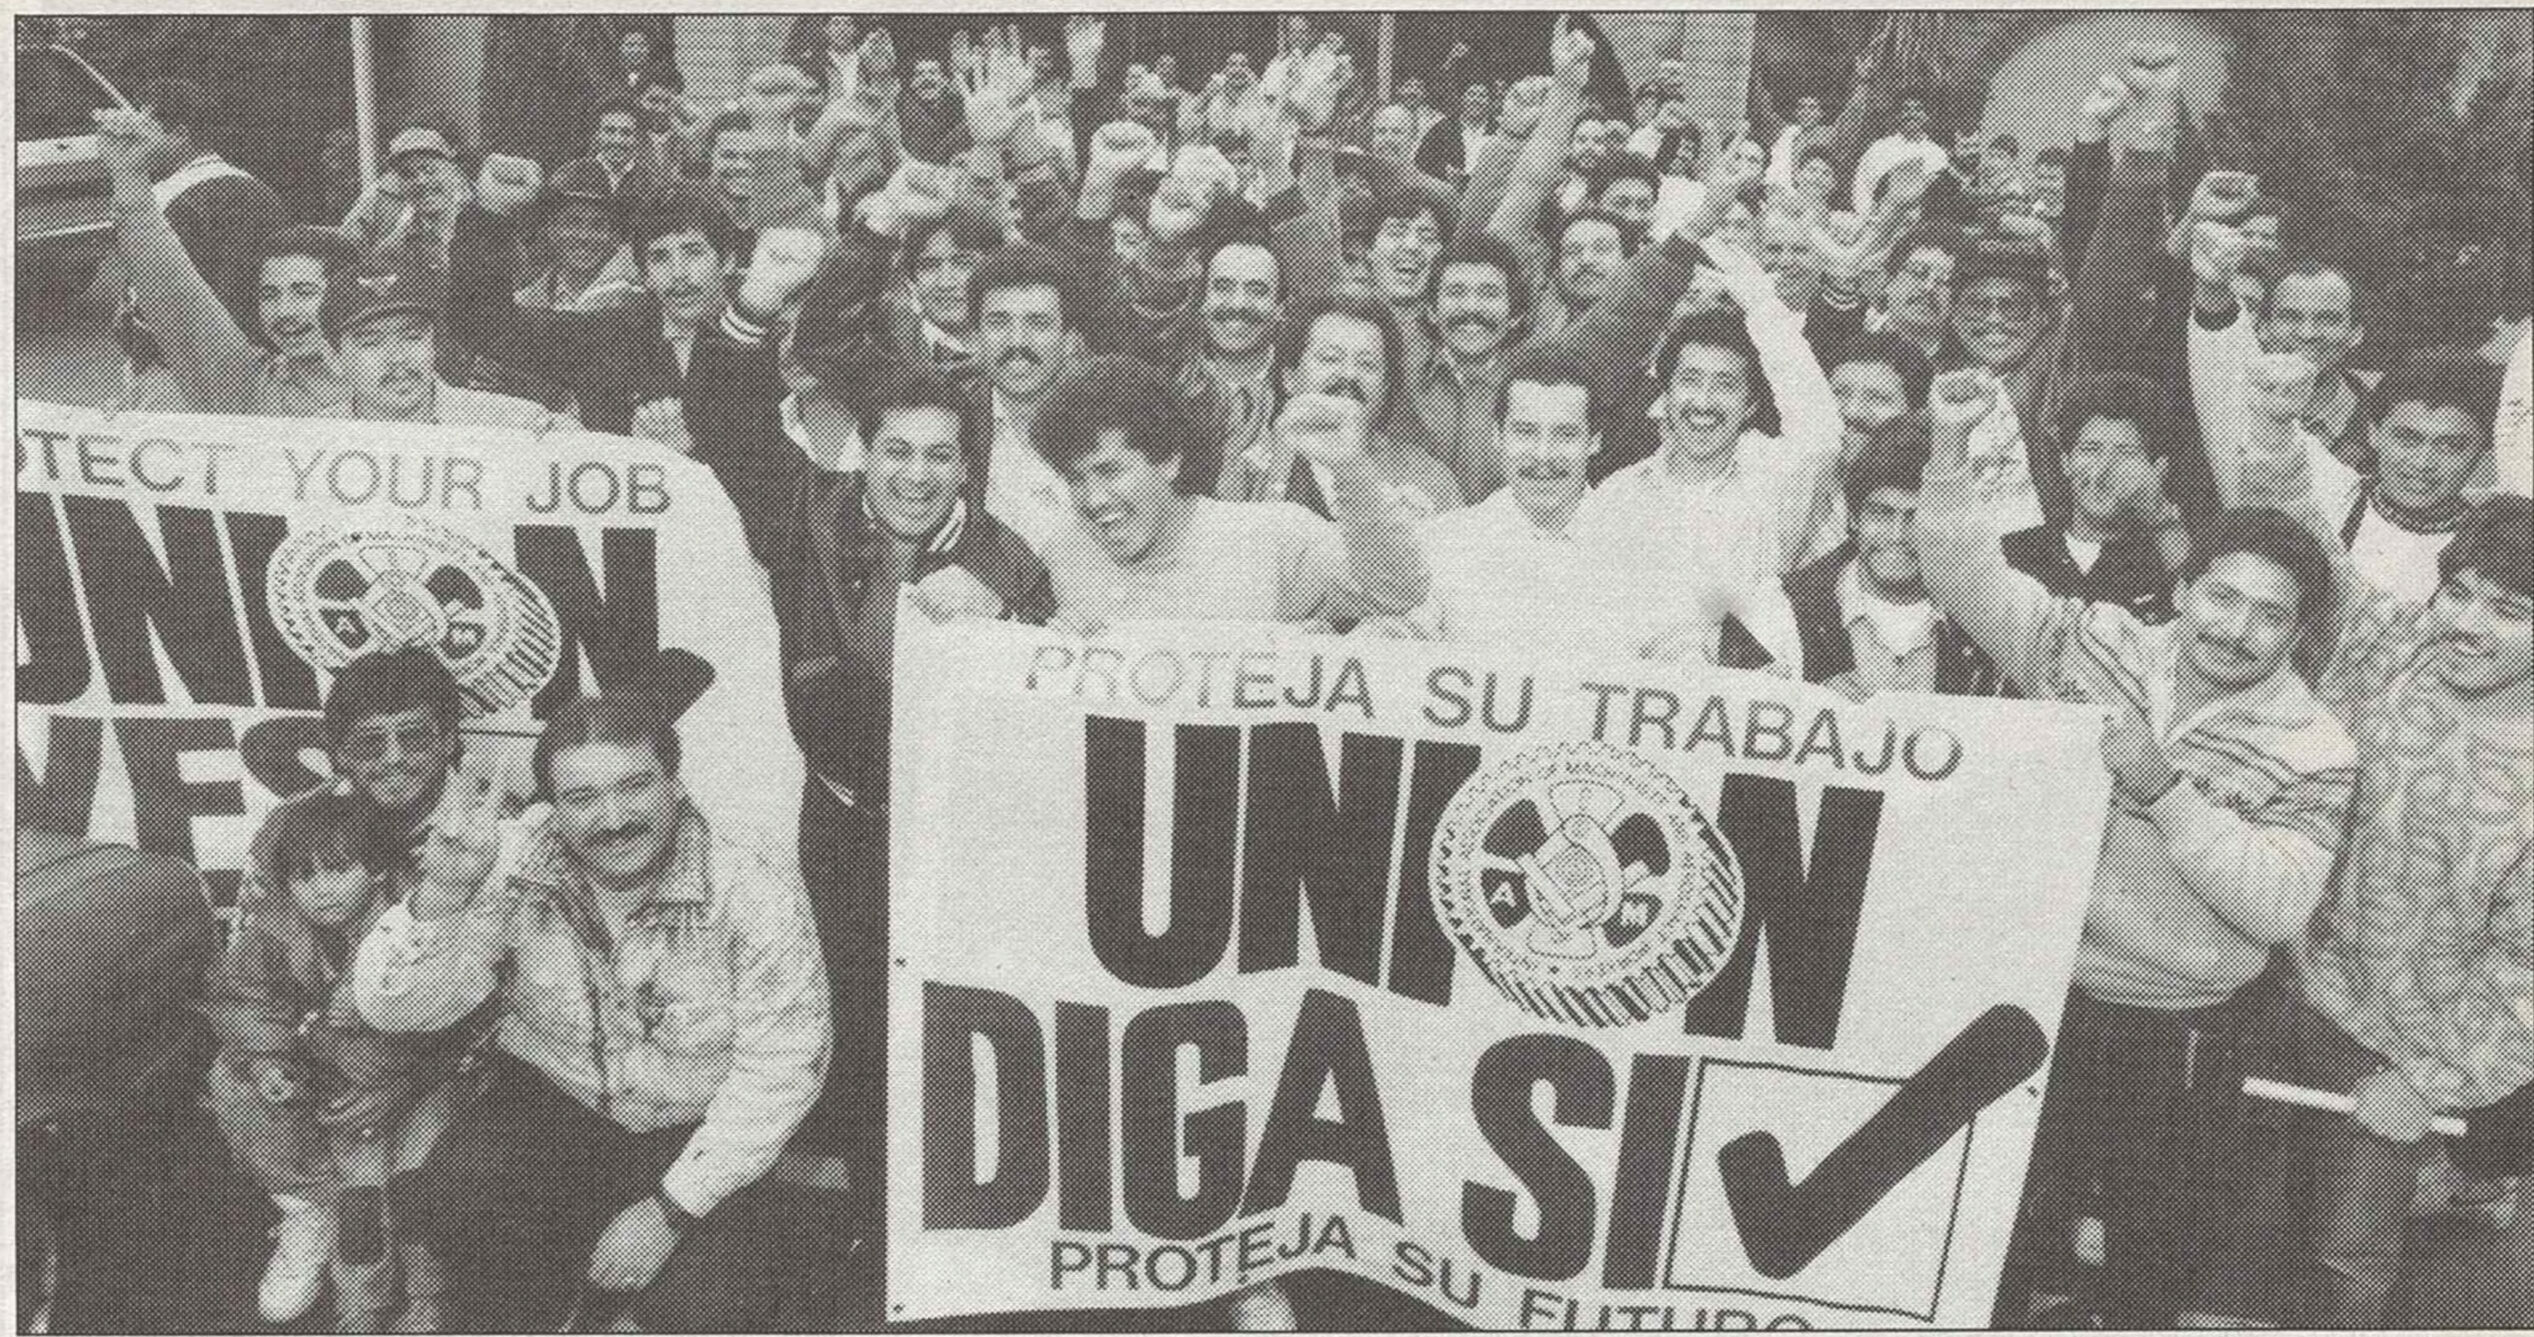 A group of men raise their fists in celebration. The hold a sign in Spanish reading, "Union, Yes!"